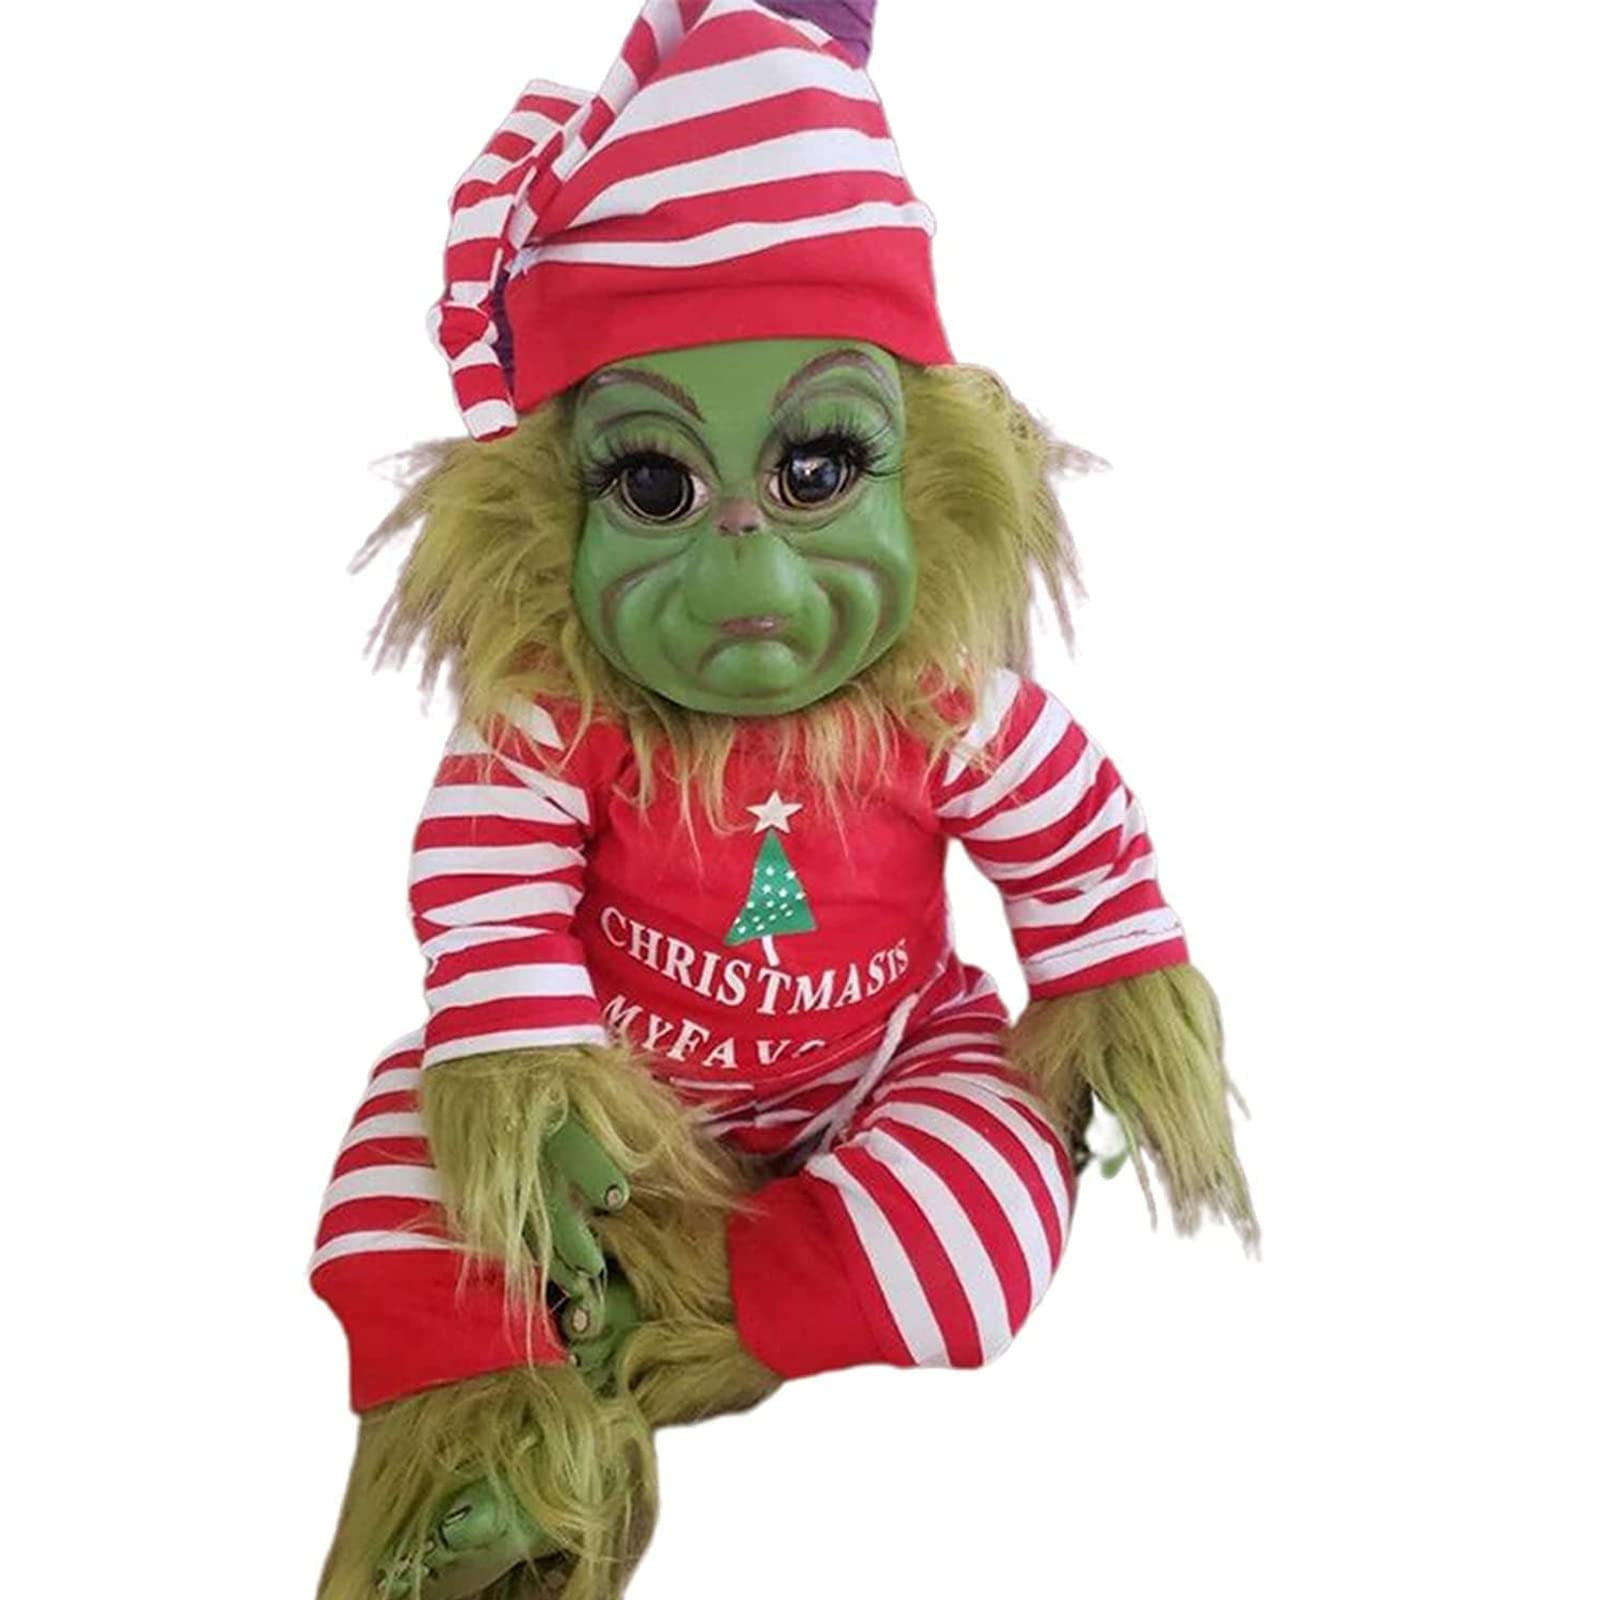 Grinch Doll, Hairy Grinch Baby with Removable Santa Costume Christmas Stuffed Plush Toy Handmade Lifelike Realistic Cartoon Doll Christmas Furry Cute Doll Toy Home Decorations image